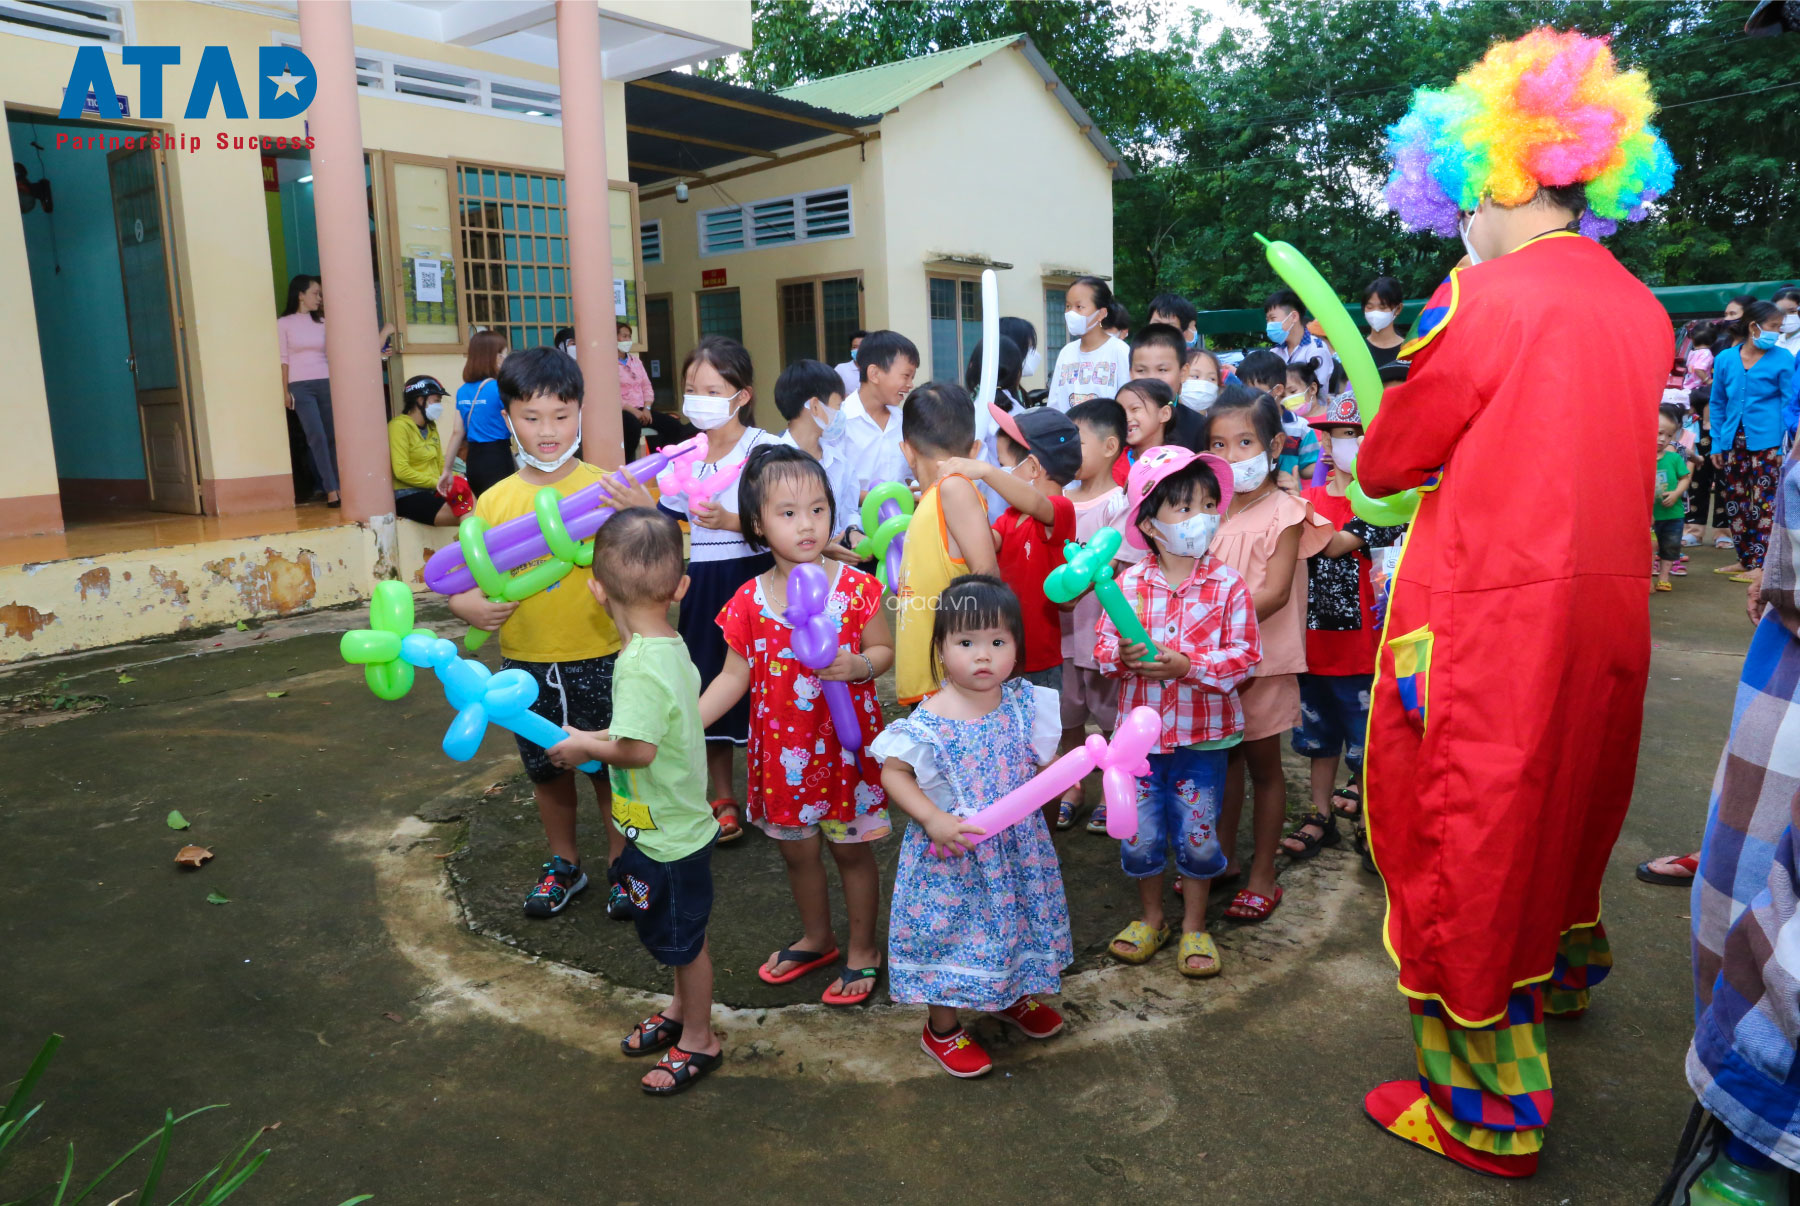 ATAD Presented Gifts For Children On International Children’s Day 1/6 & Necessities For Underprivileged Households Living In Song Nhan Village, Dong Nai Province 12